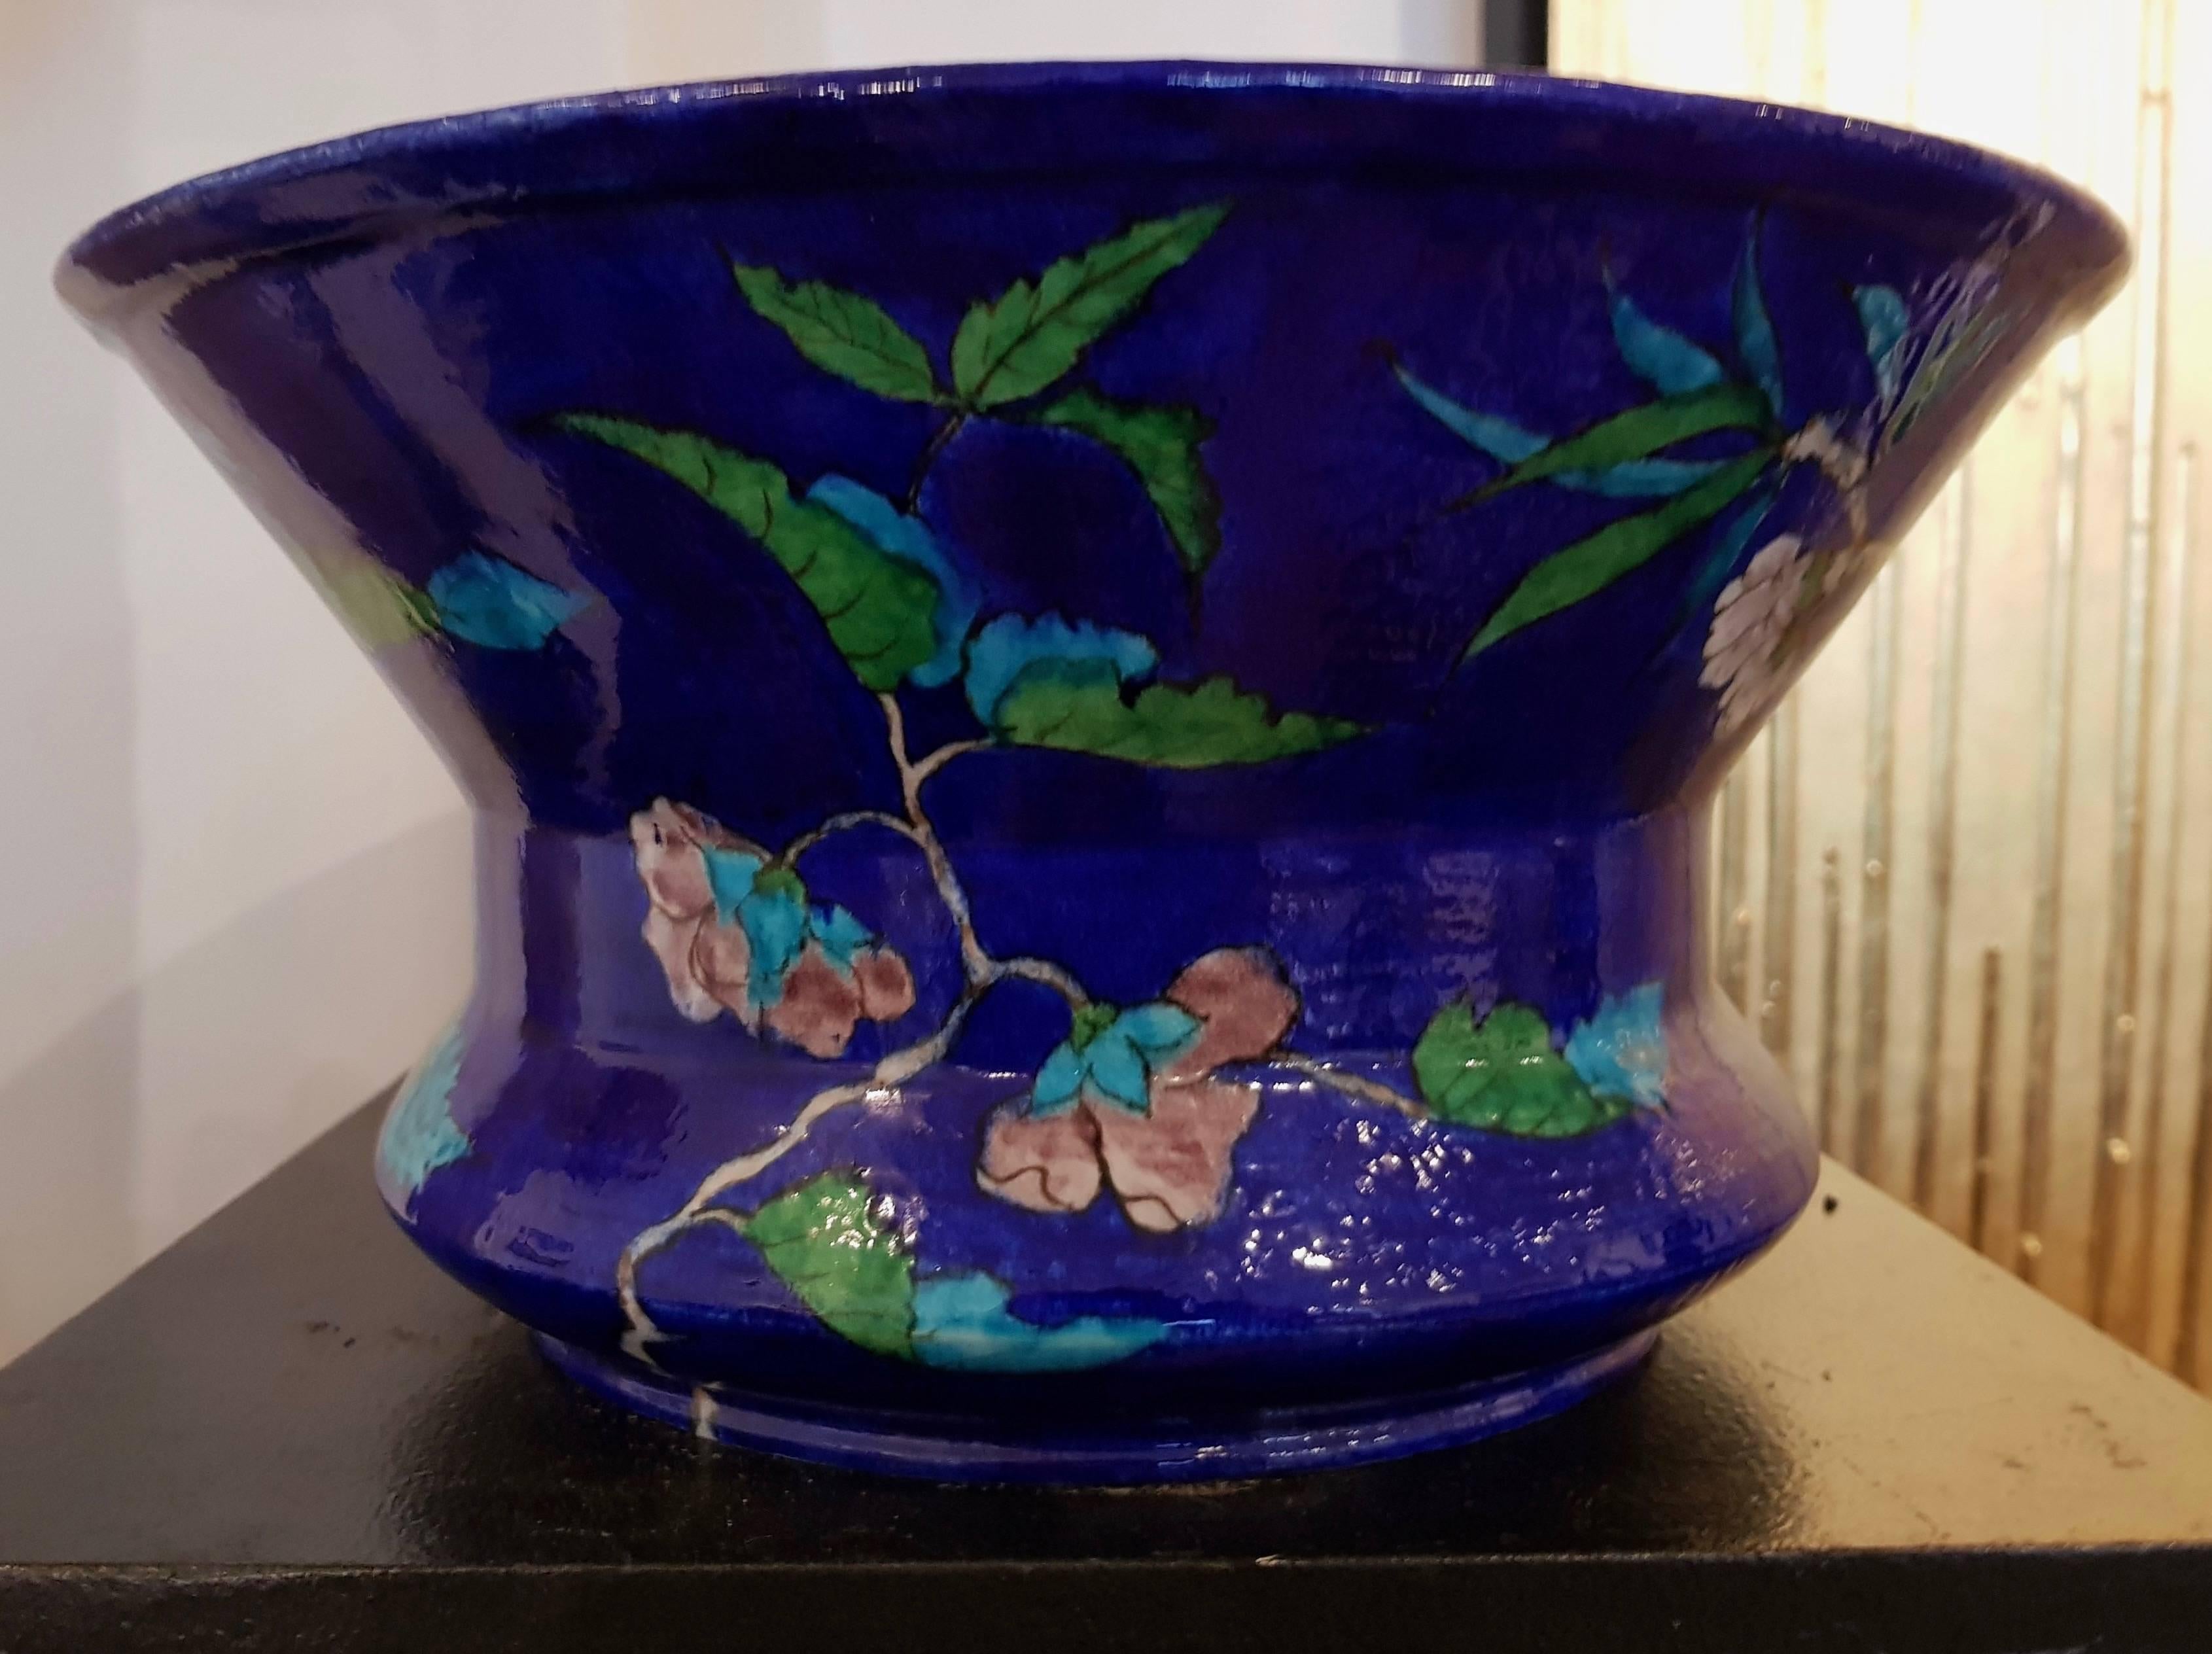 A Polychrome Theodore deck blue-ground Enamelled Faience Jardinière 
Impressed Uppercase Mark TD
Of waisted flaring form, painted in the Japonisme Aesthetic with Dogrose, wisteria and other flowering branches and foliage.

